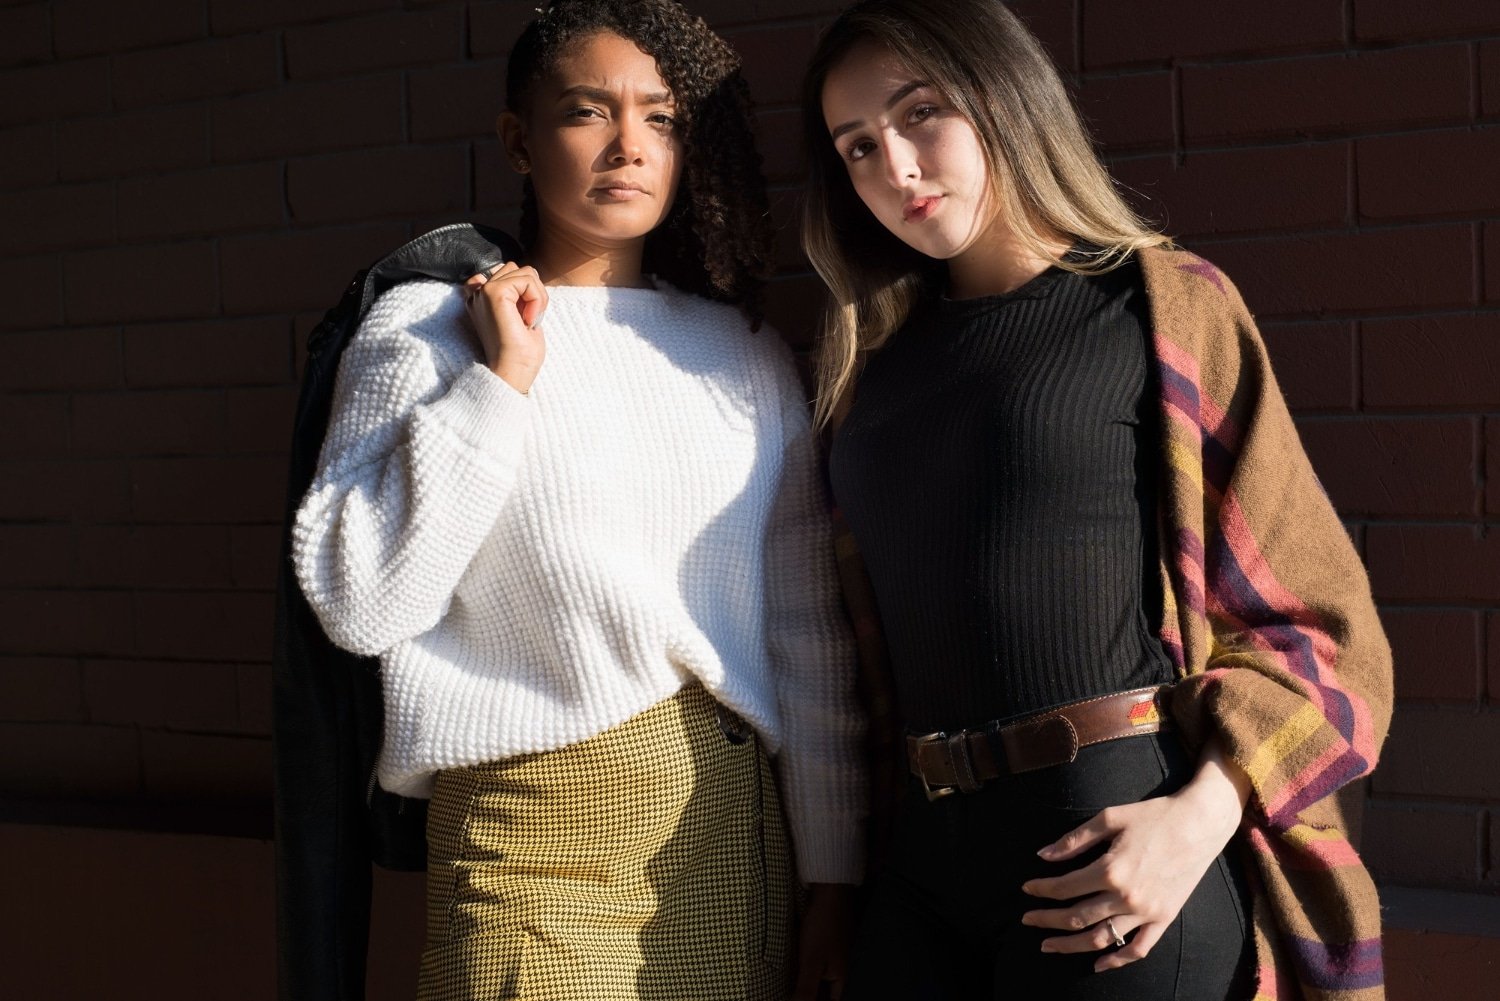 Embrace Inclusive Fashion With Urbody Functional Fashion’s Gender-Neutral Apparel